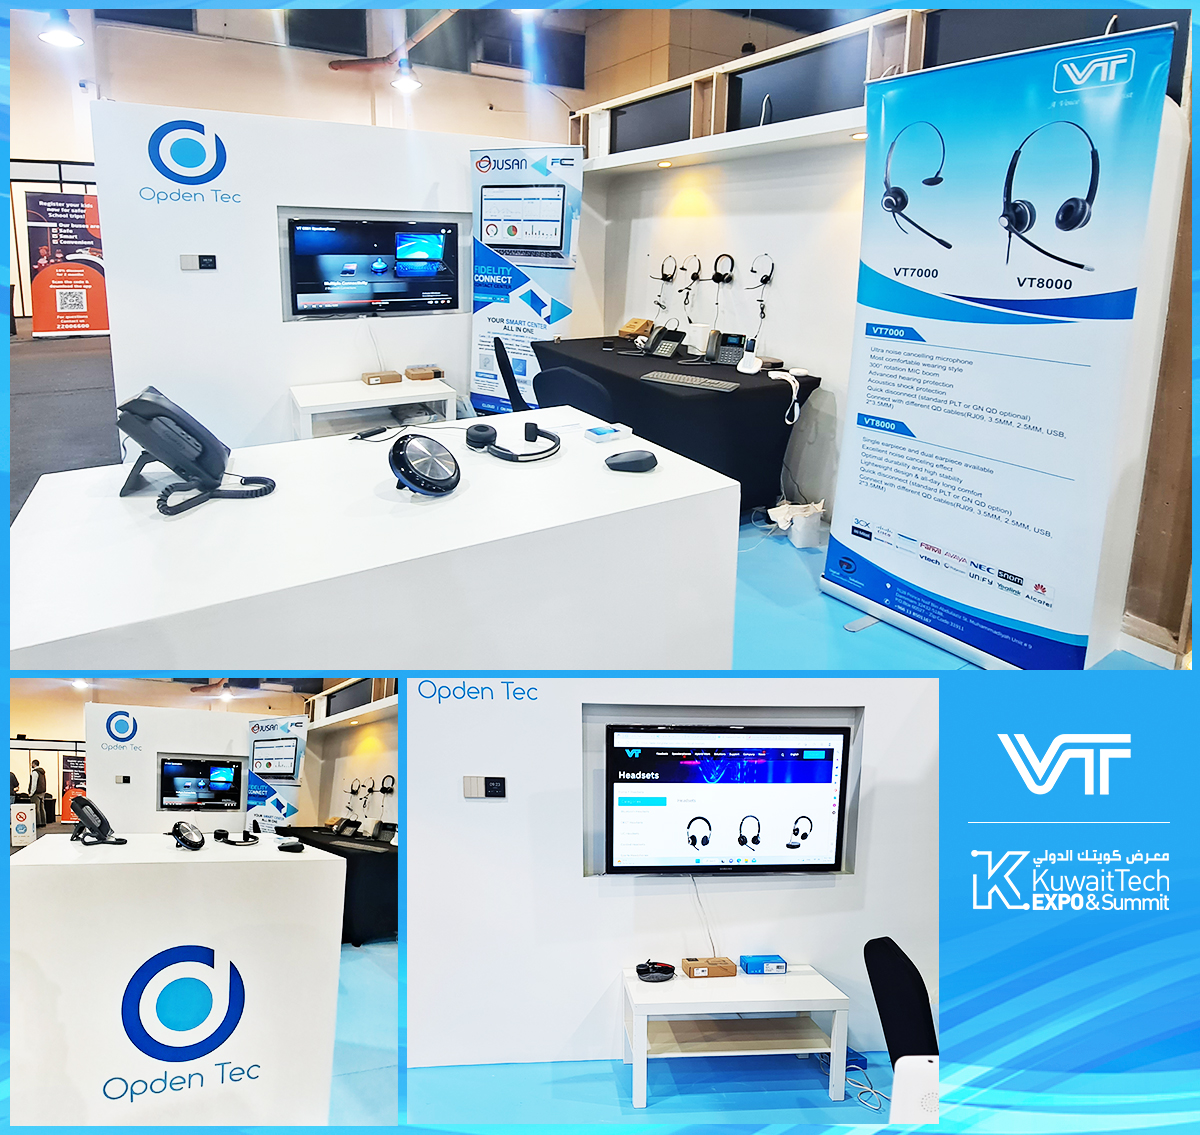 VT Kuwait Distributor participate in  KuwaitTech EXPO & Summit Exhibition  with VT Headsets on 8-11 Feb 2023